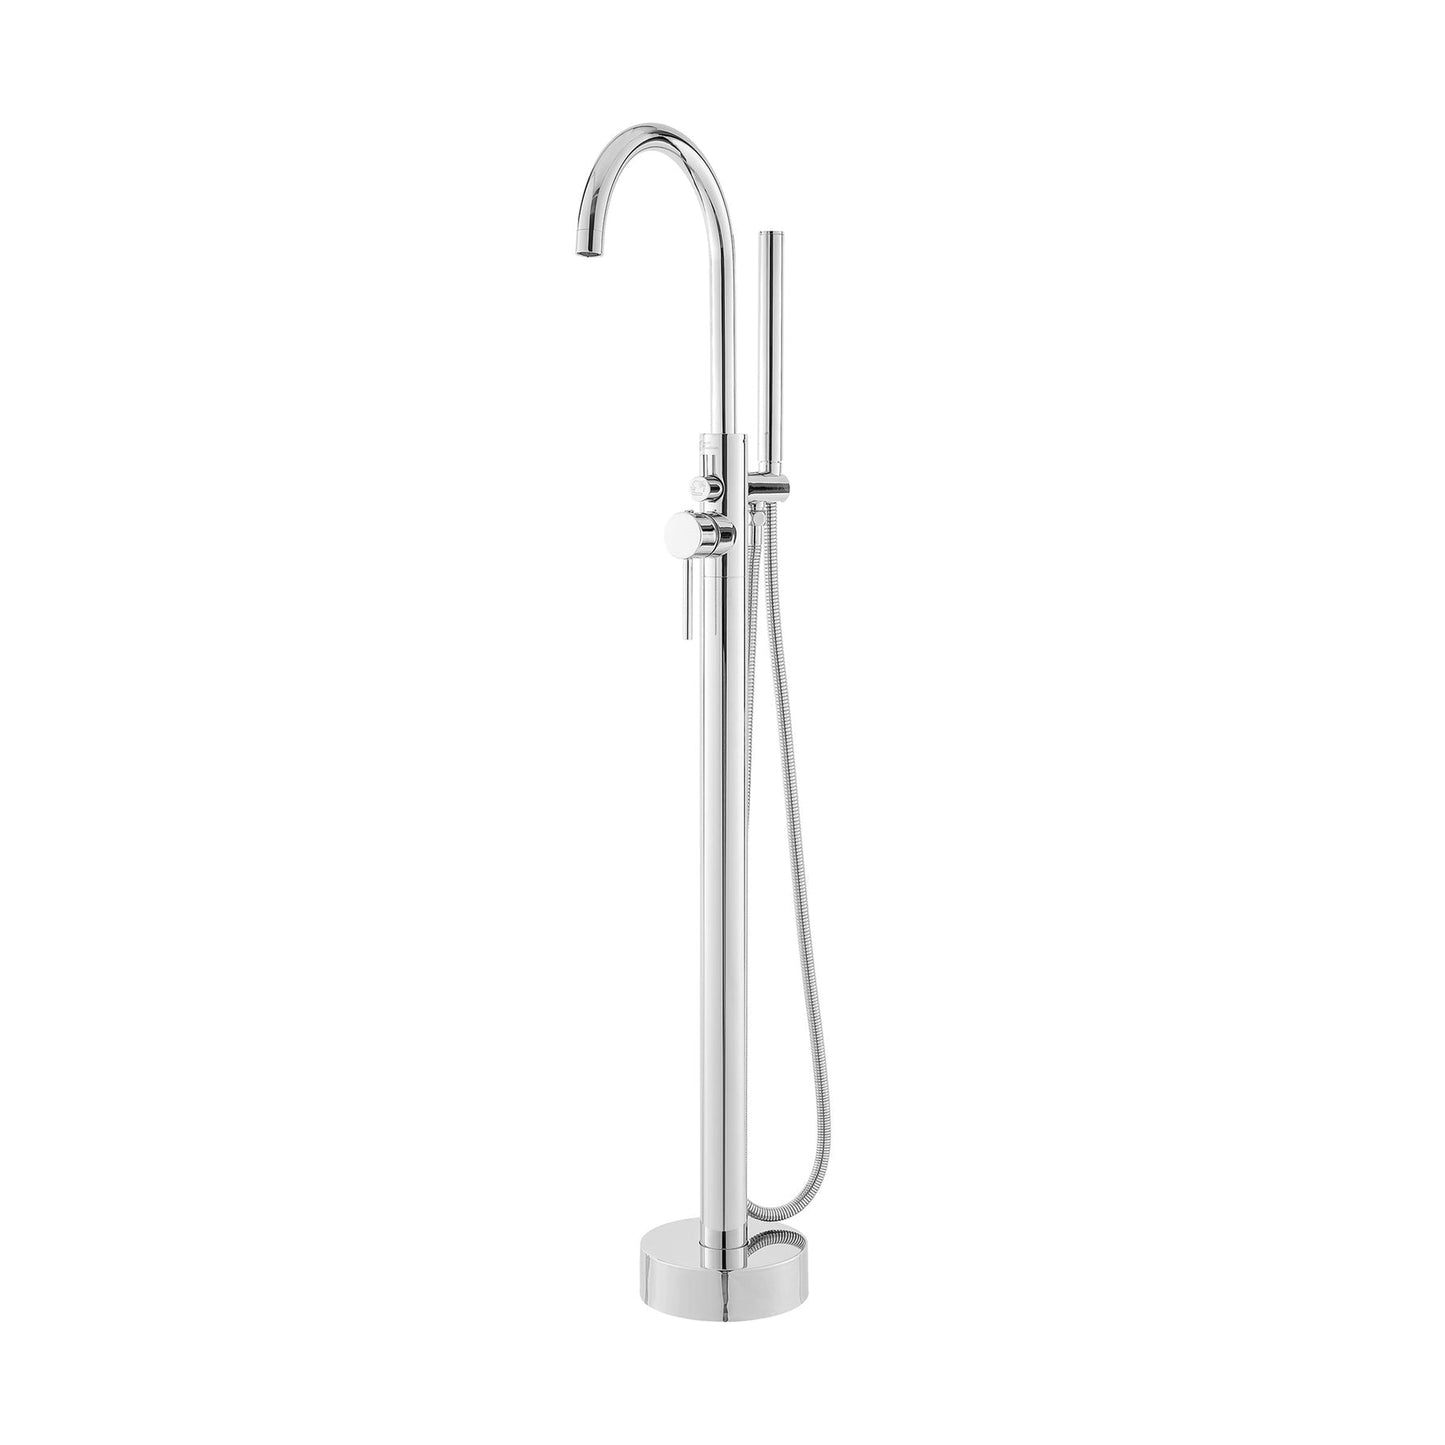 Swiss Madison Ivy 43" Chrome Single Hole Floor Mounted Bathtub Faucet With Hand Shower, Tub Spout and Handle